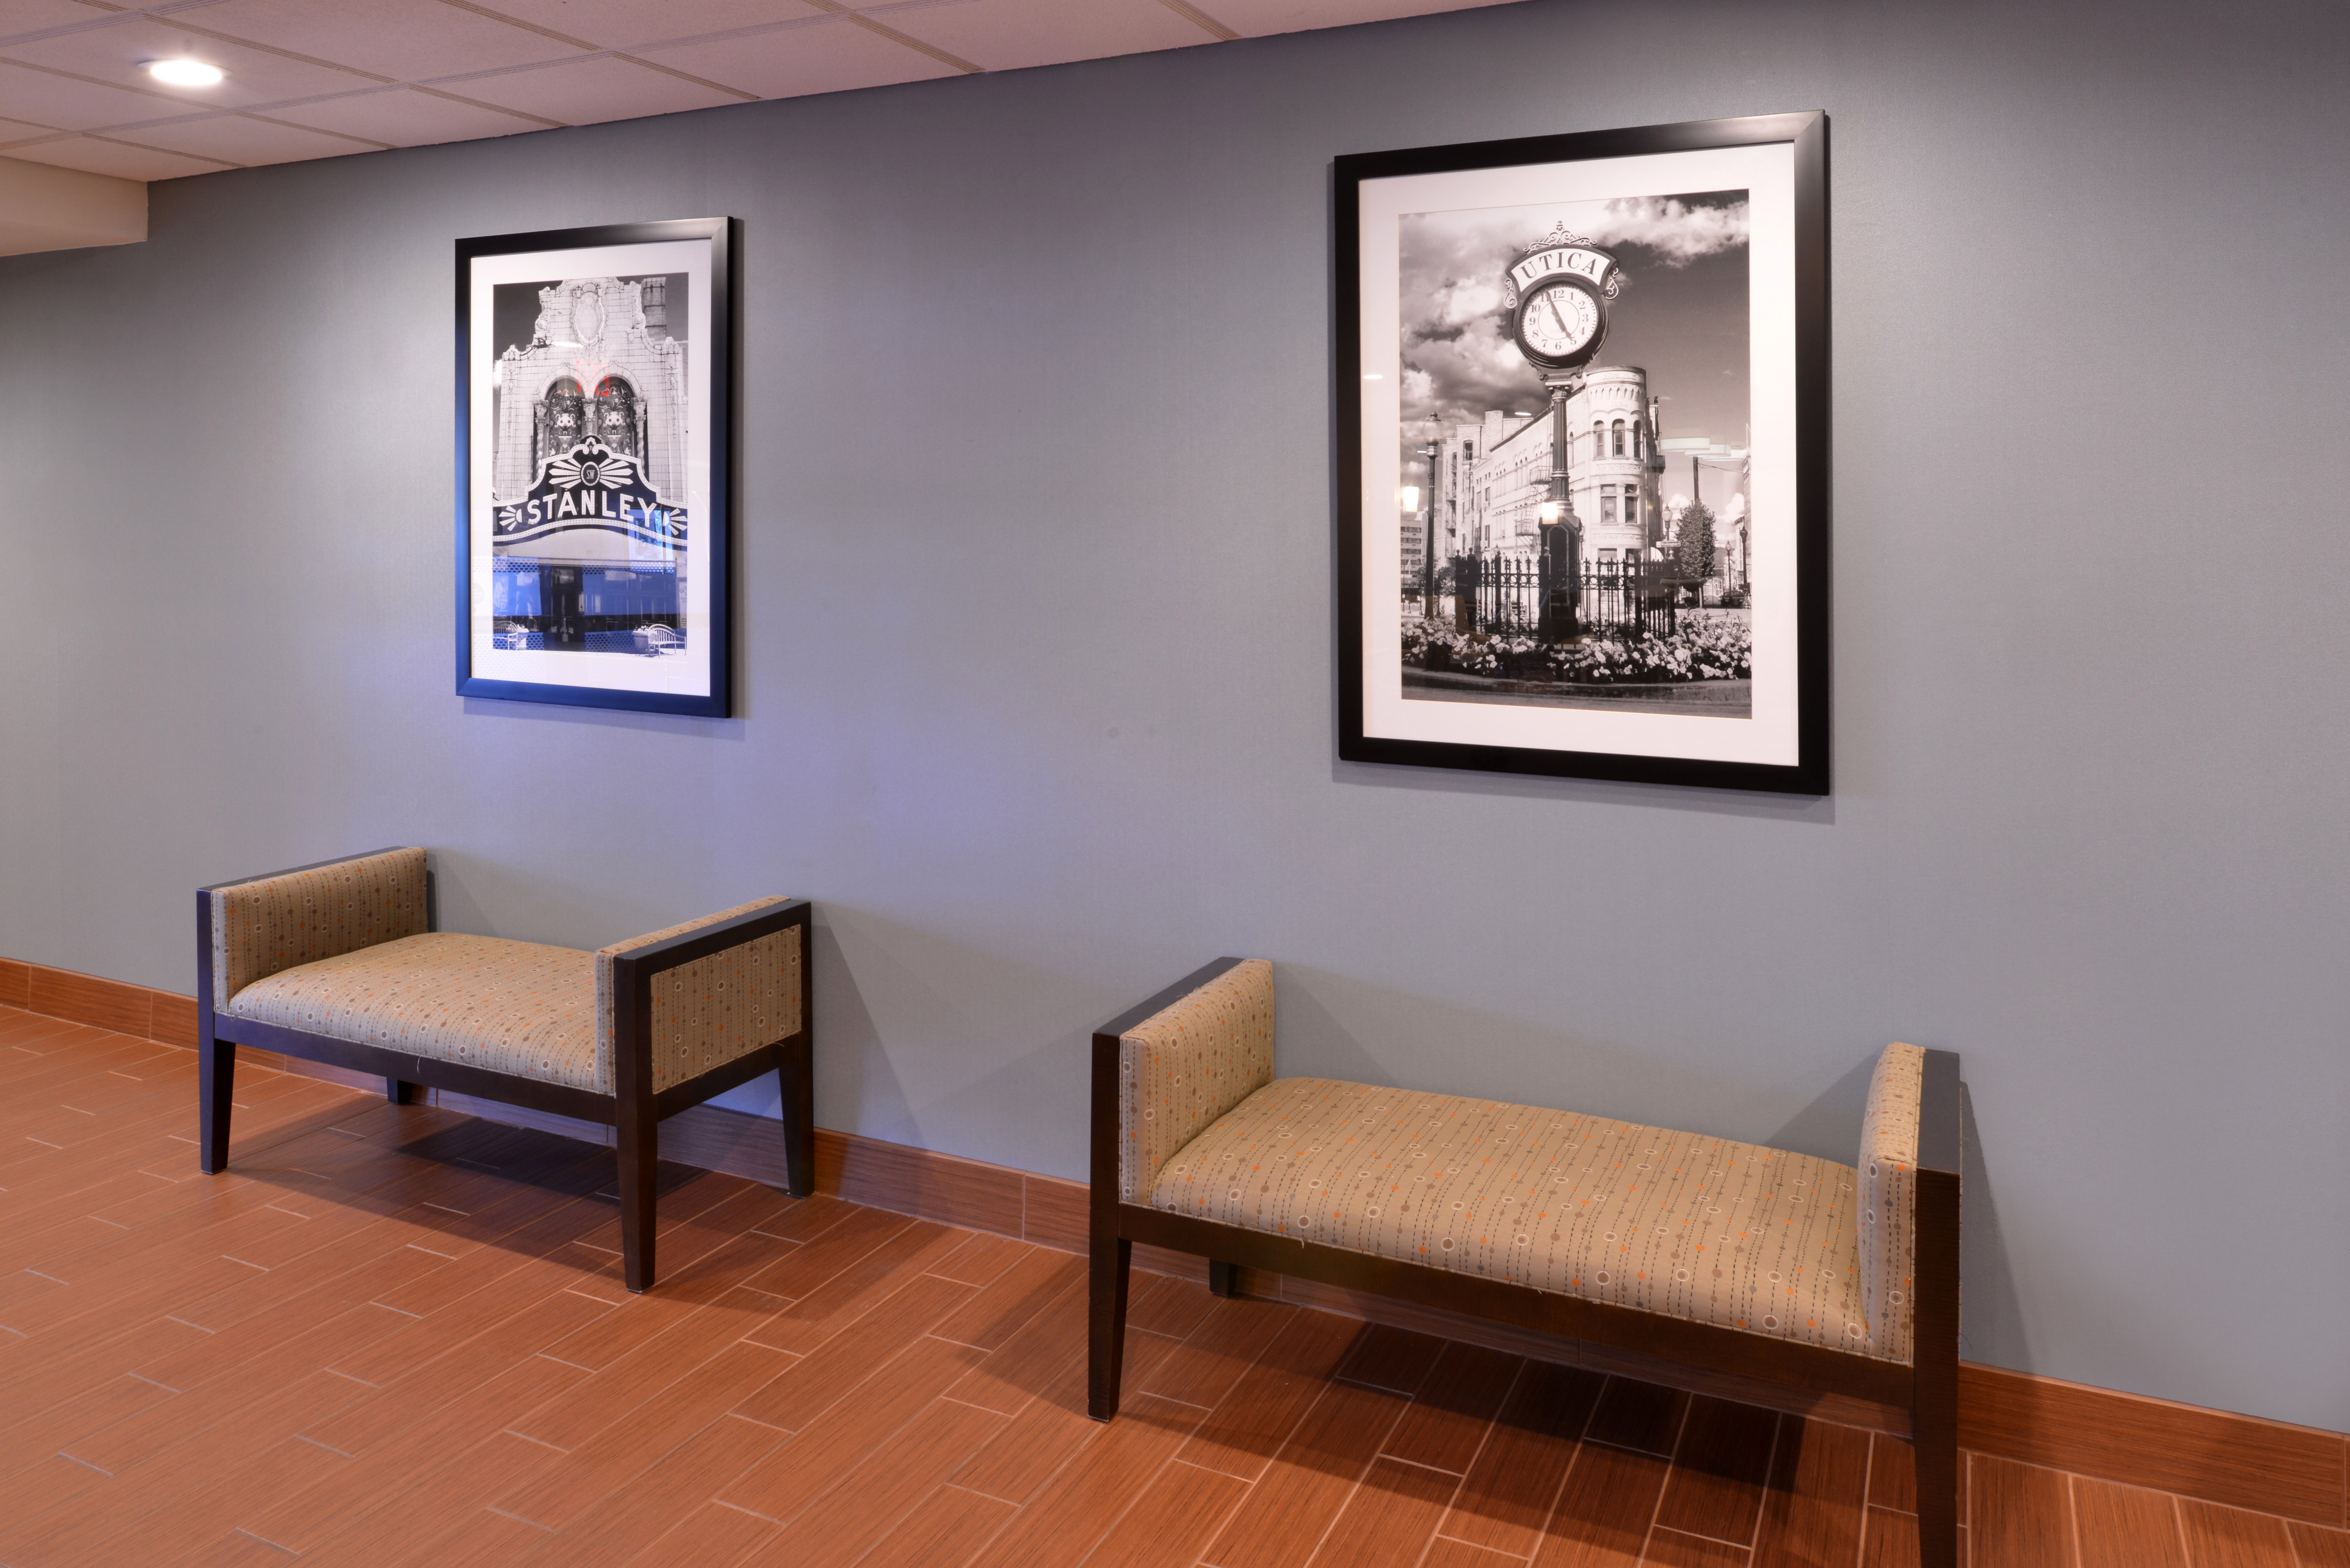 Bench Seating and Wall Art in Lobby